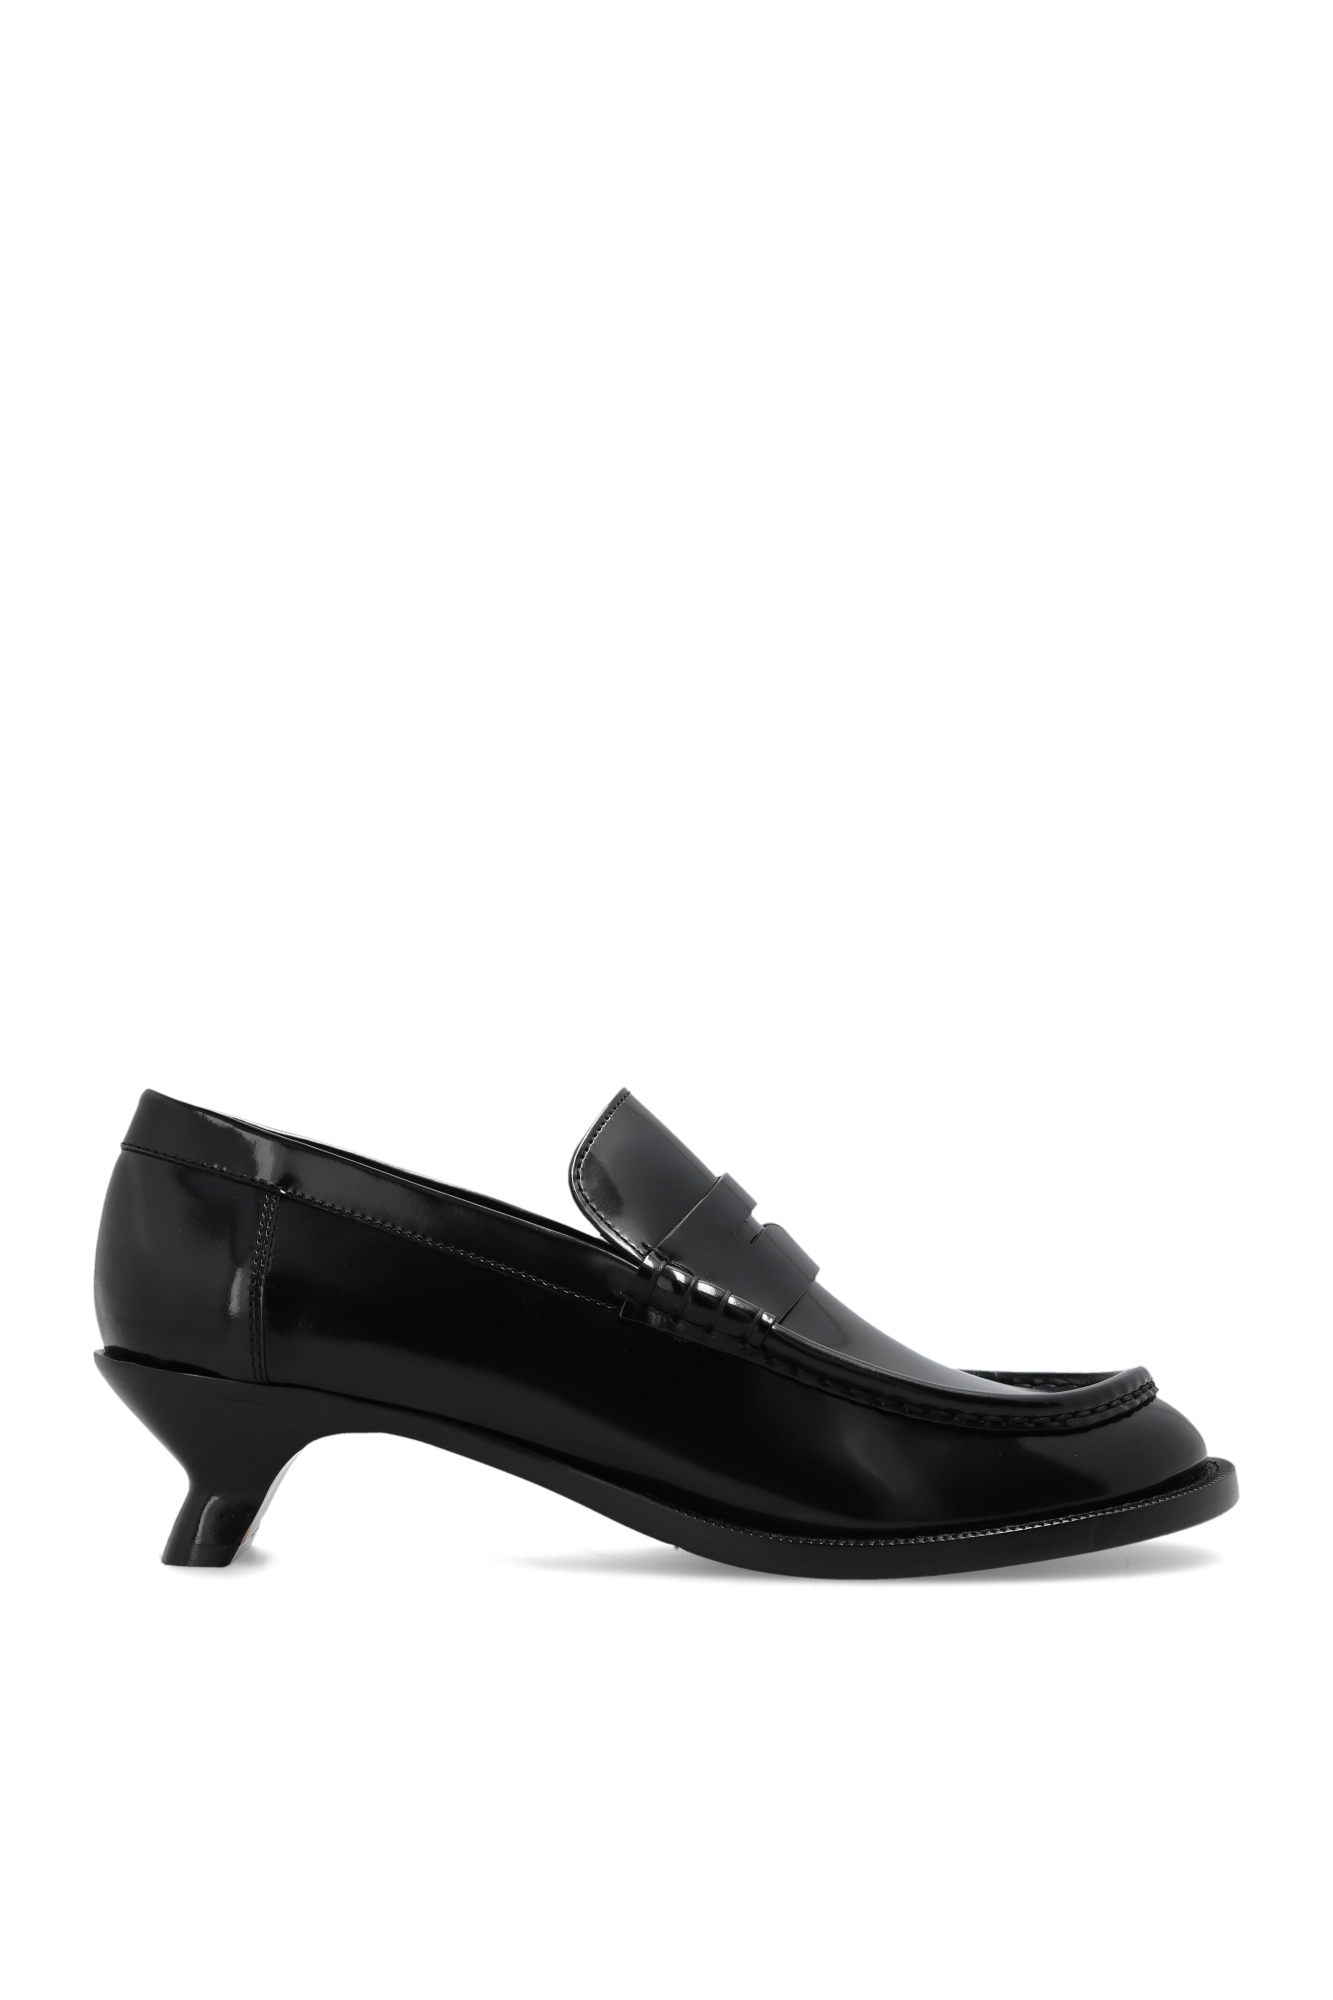 Loewe ‘Campo’ leather loafer pumps | Women's Shoes | Vitkac